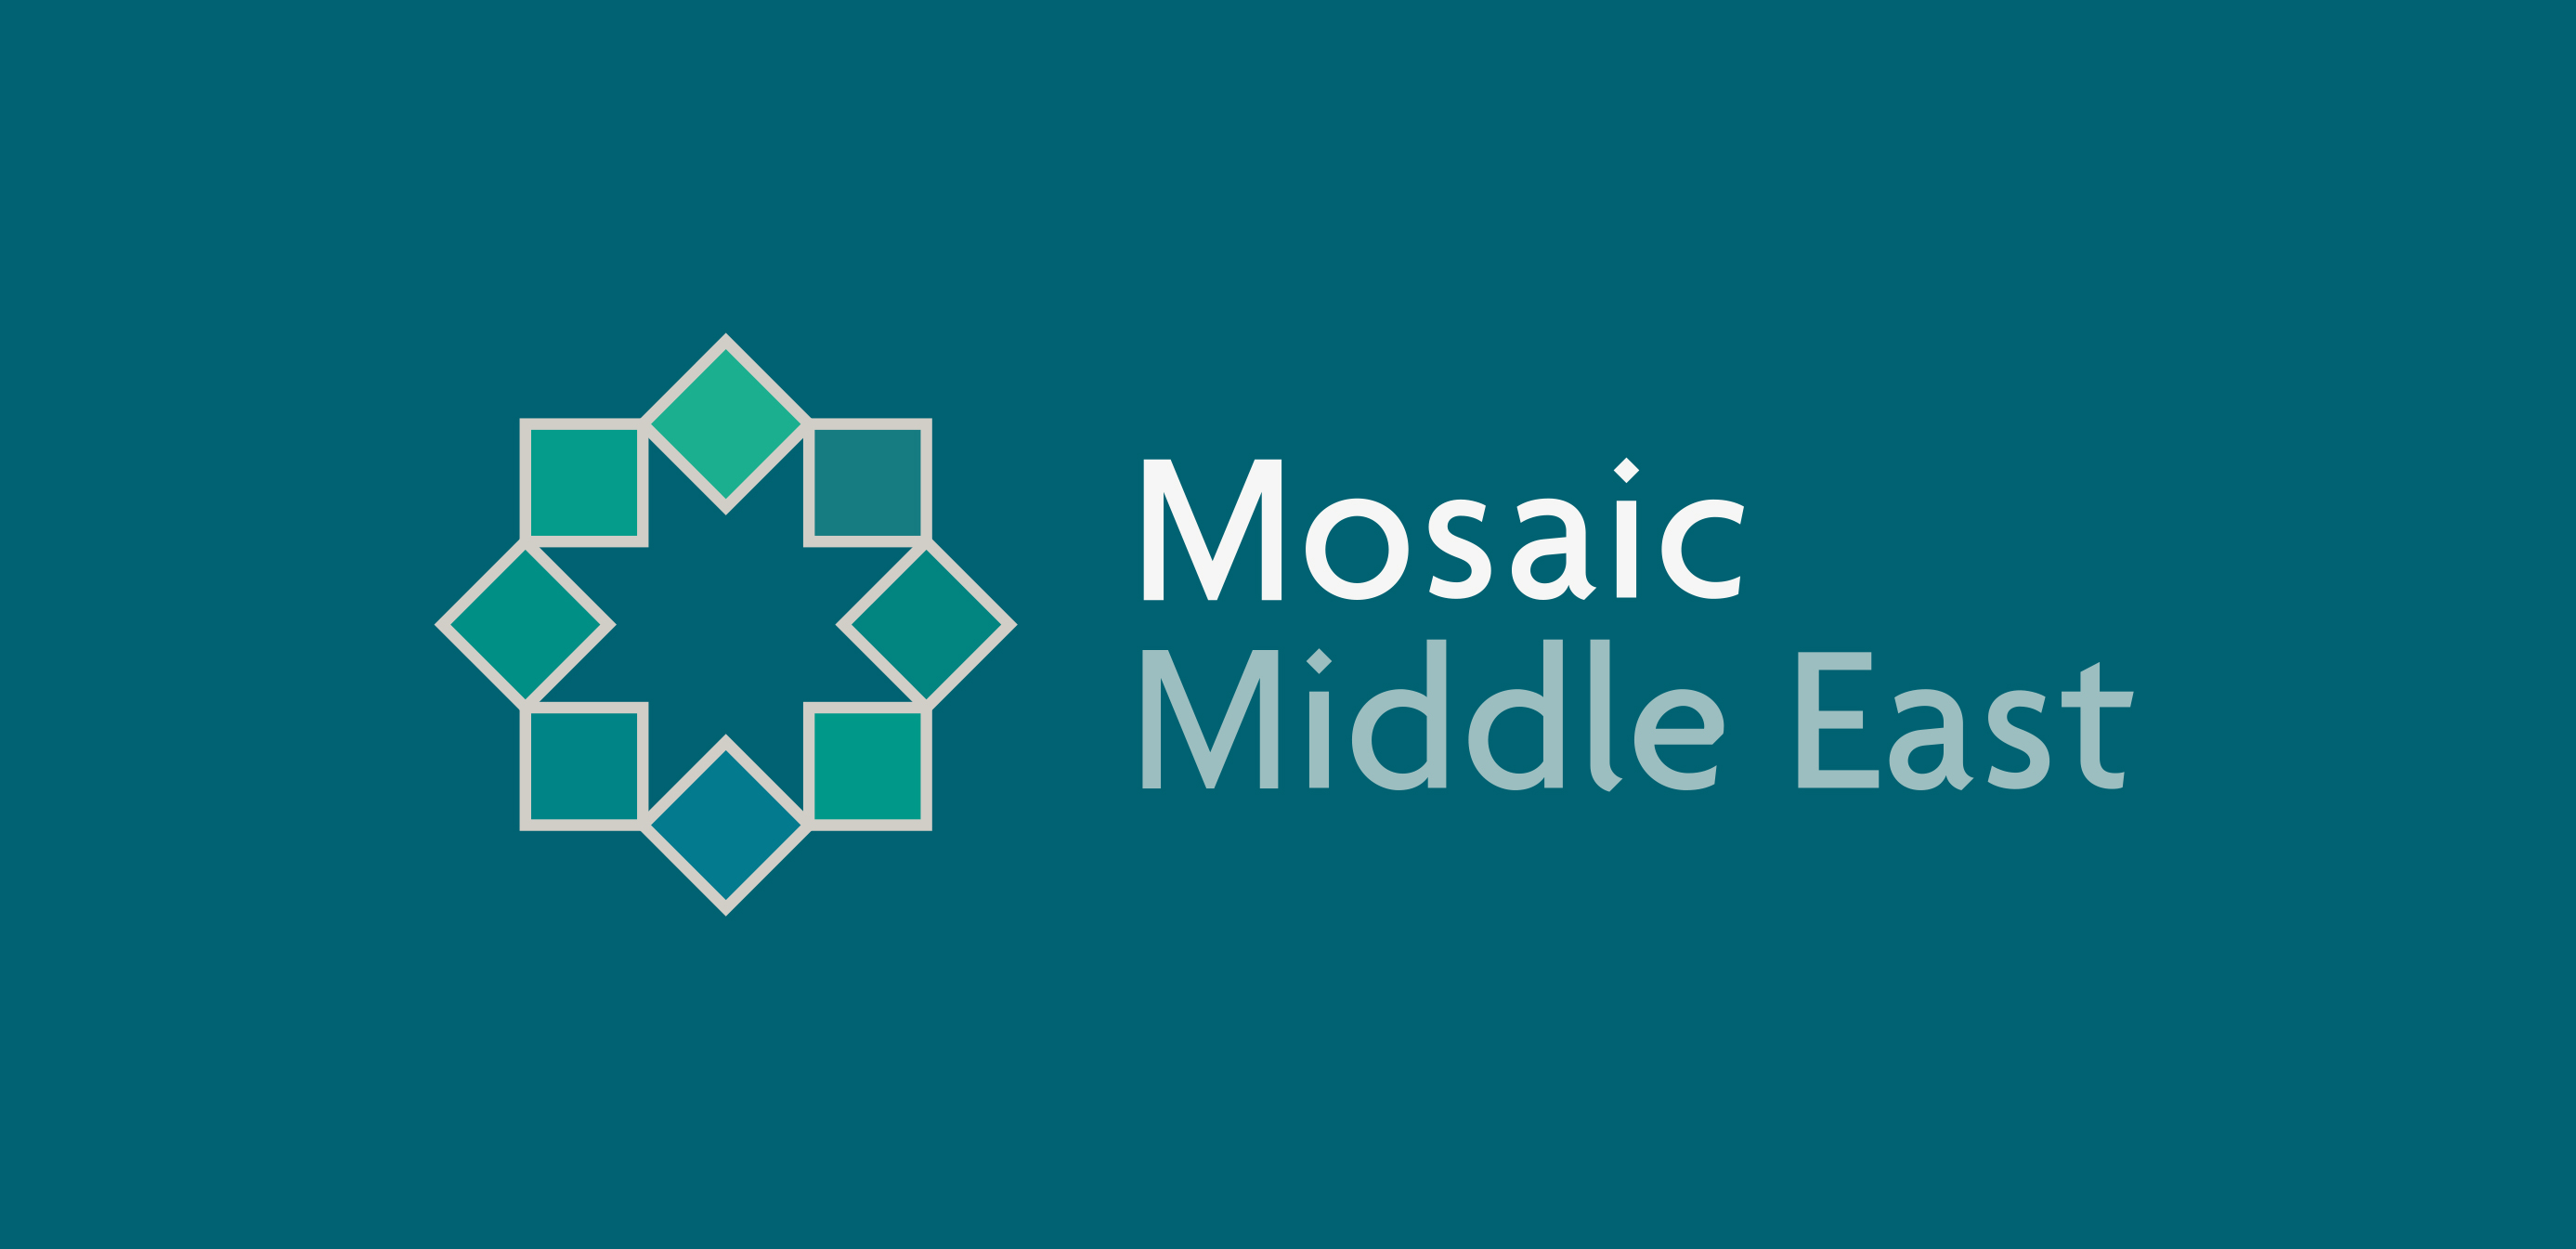 Mosaic Middle East